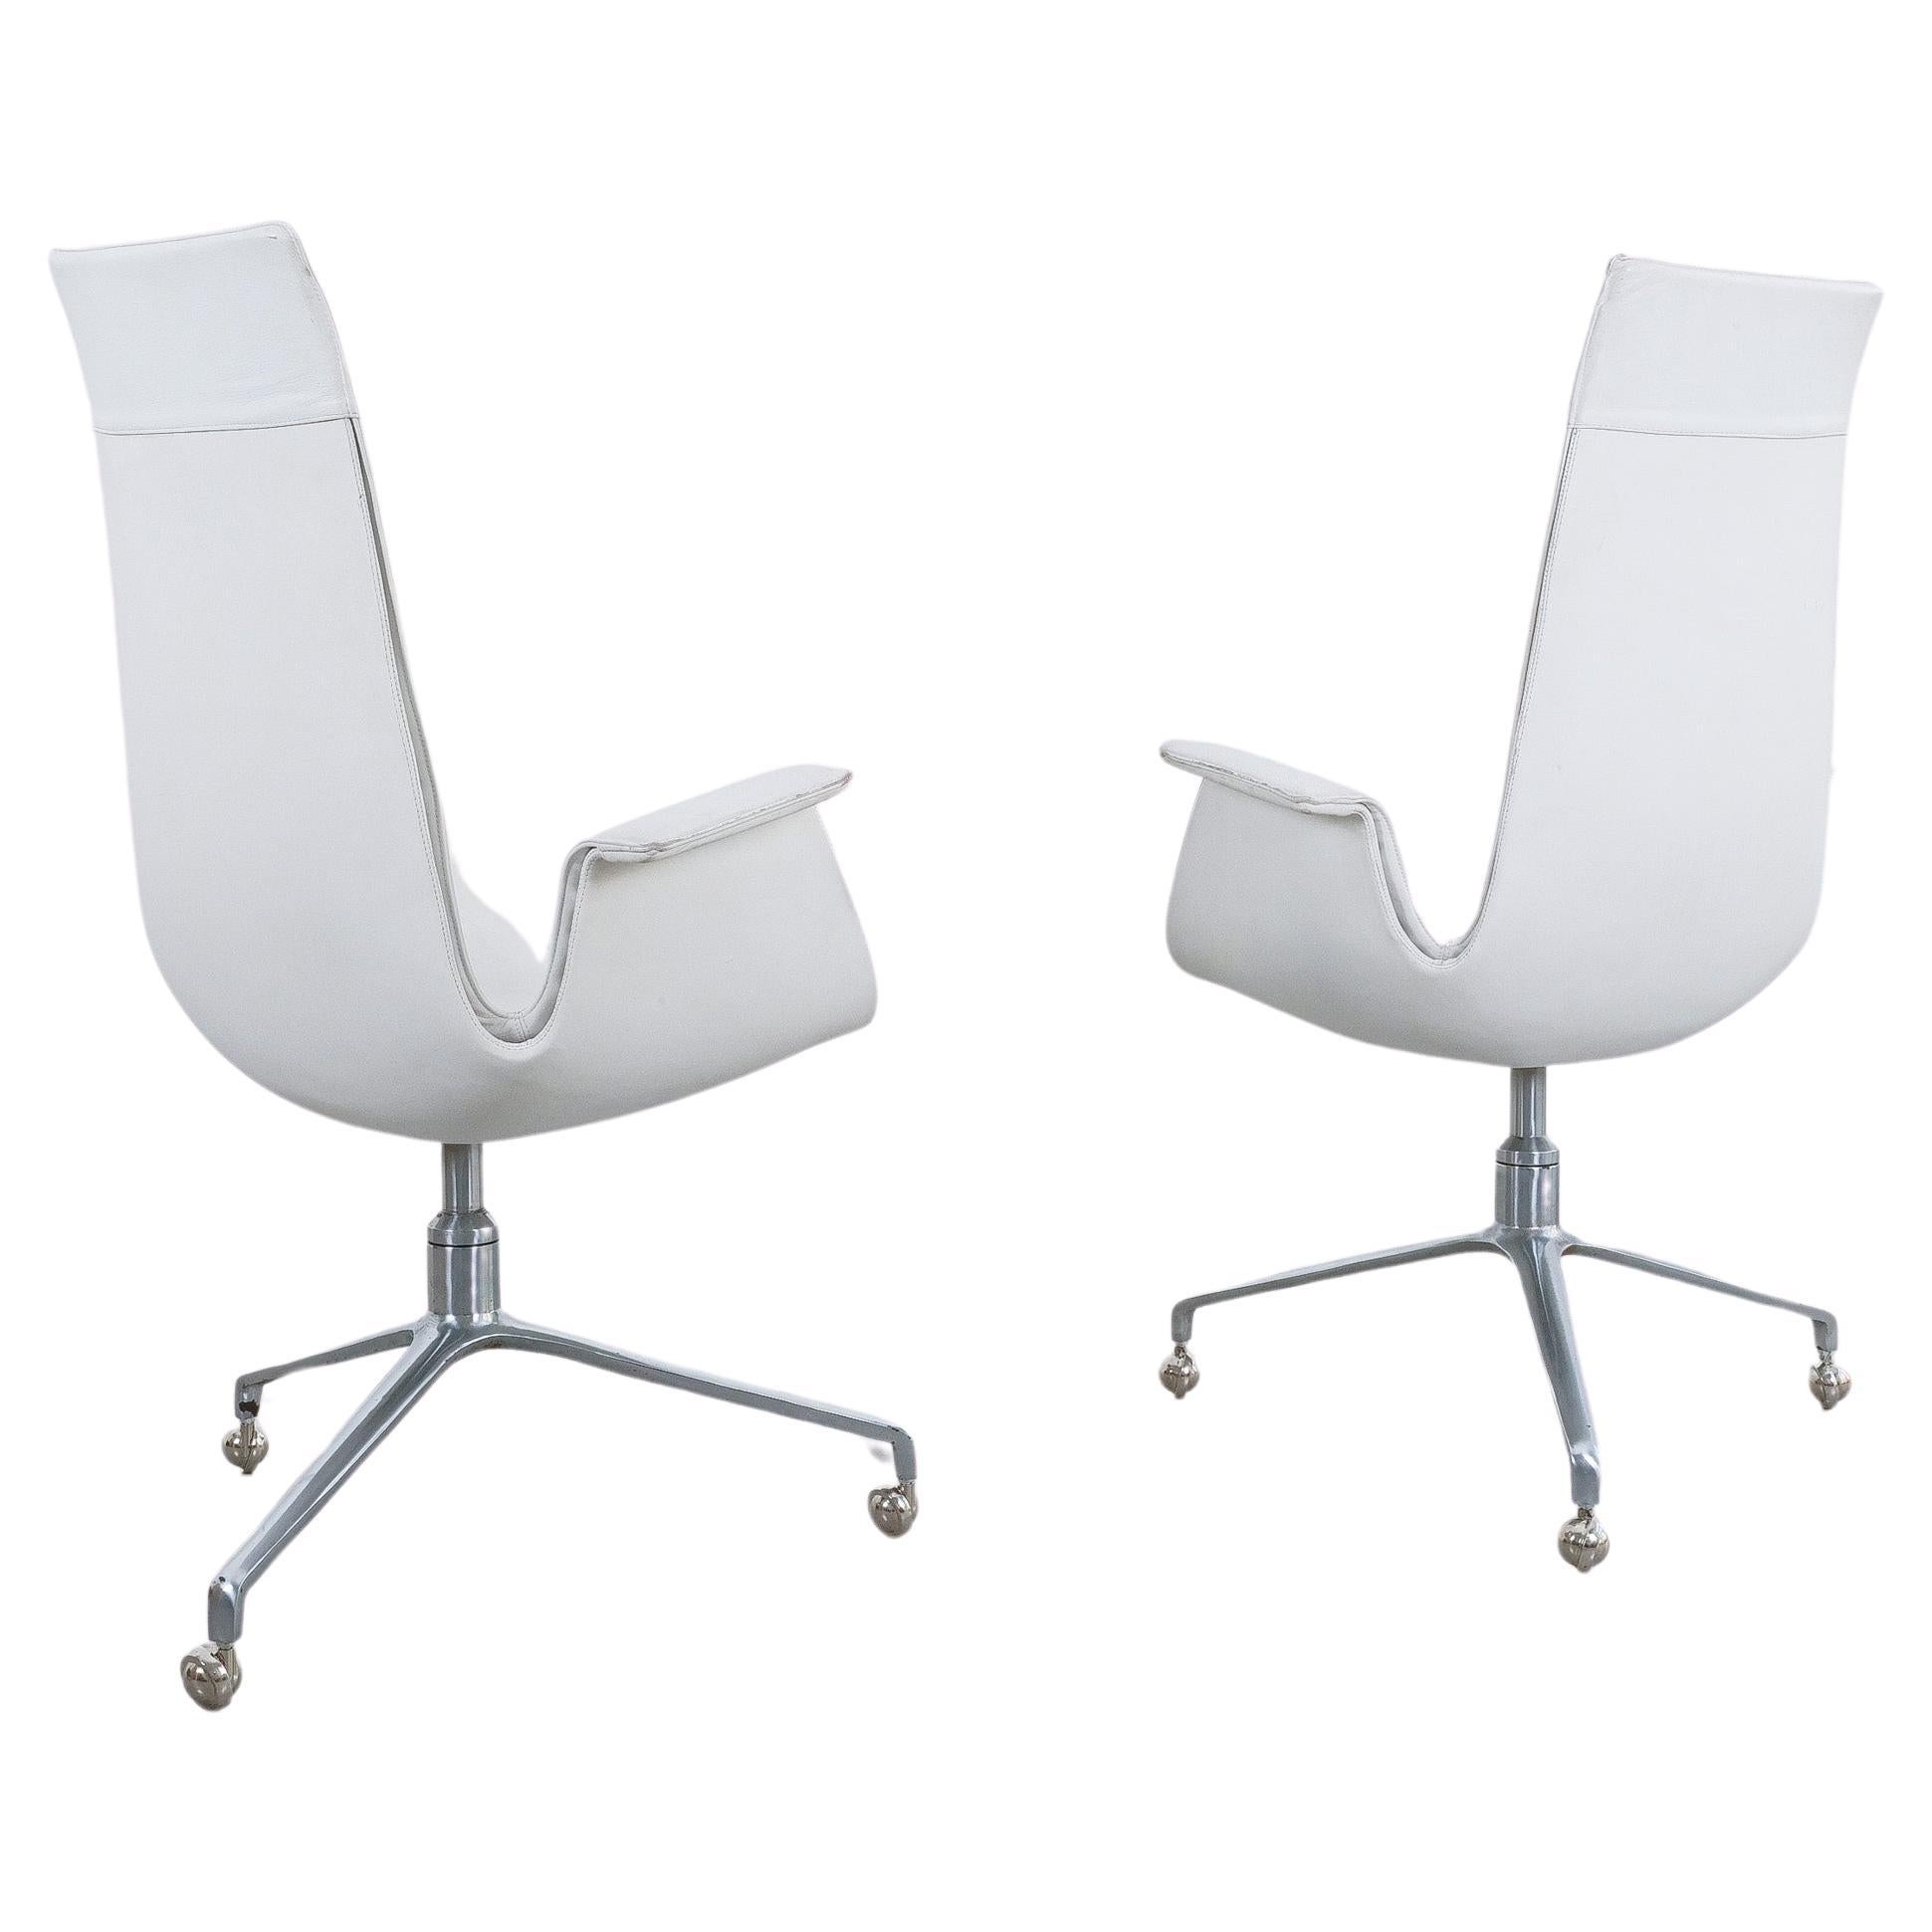 Fabricius and Kastholm White High Back Desk Chairs (3) Swivel Base FK 6725, 1964 For Sale